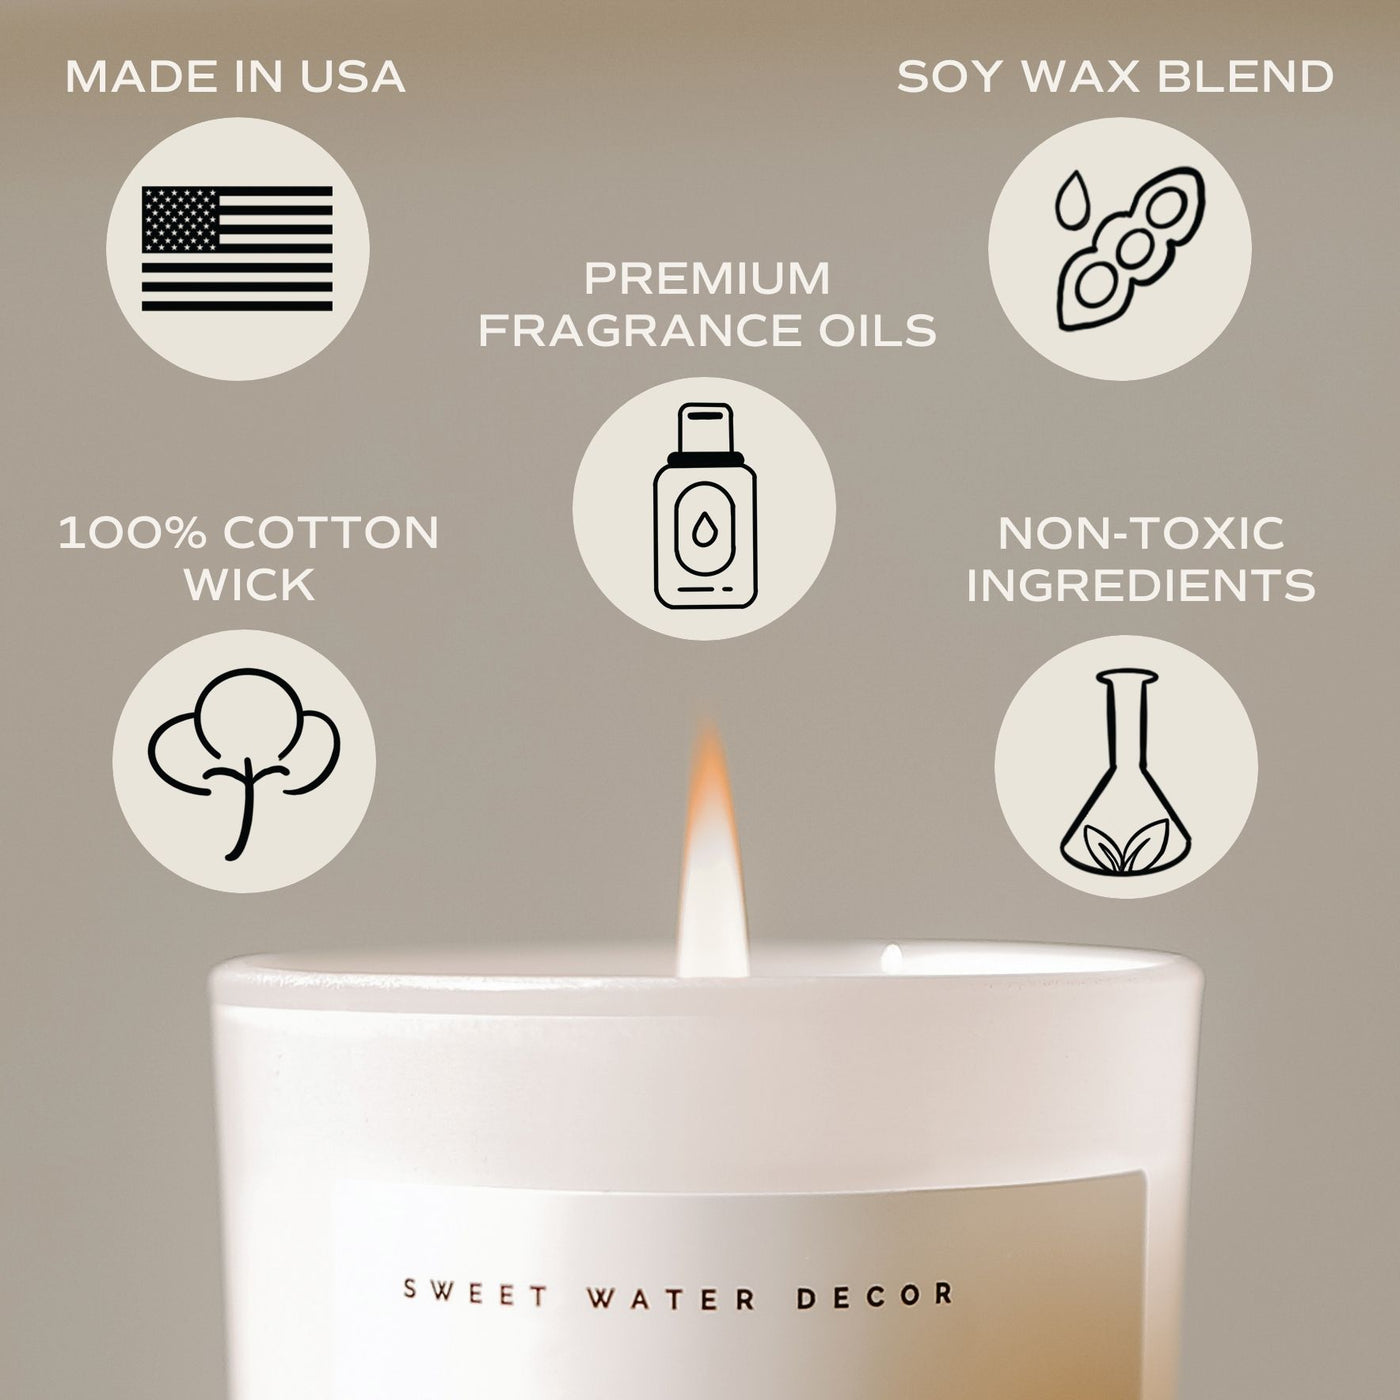 Warm and Cozy Soy Candle - White Jar - 11 oz